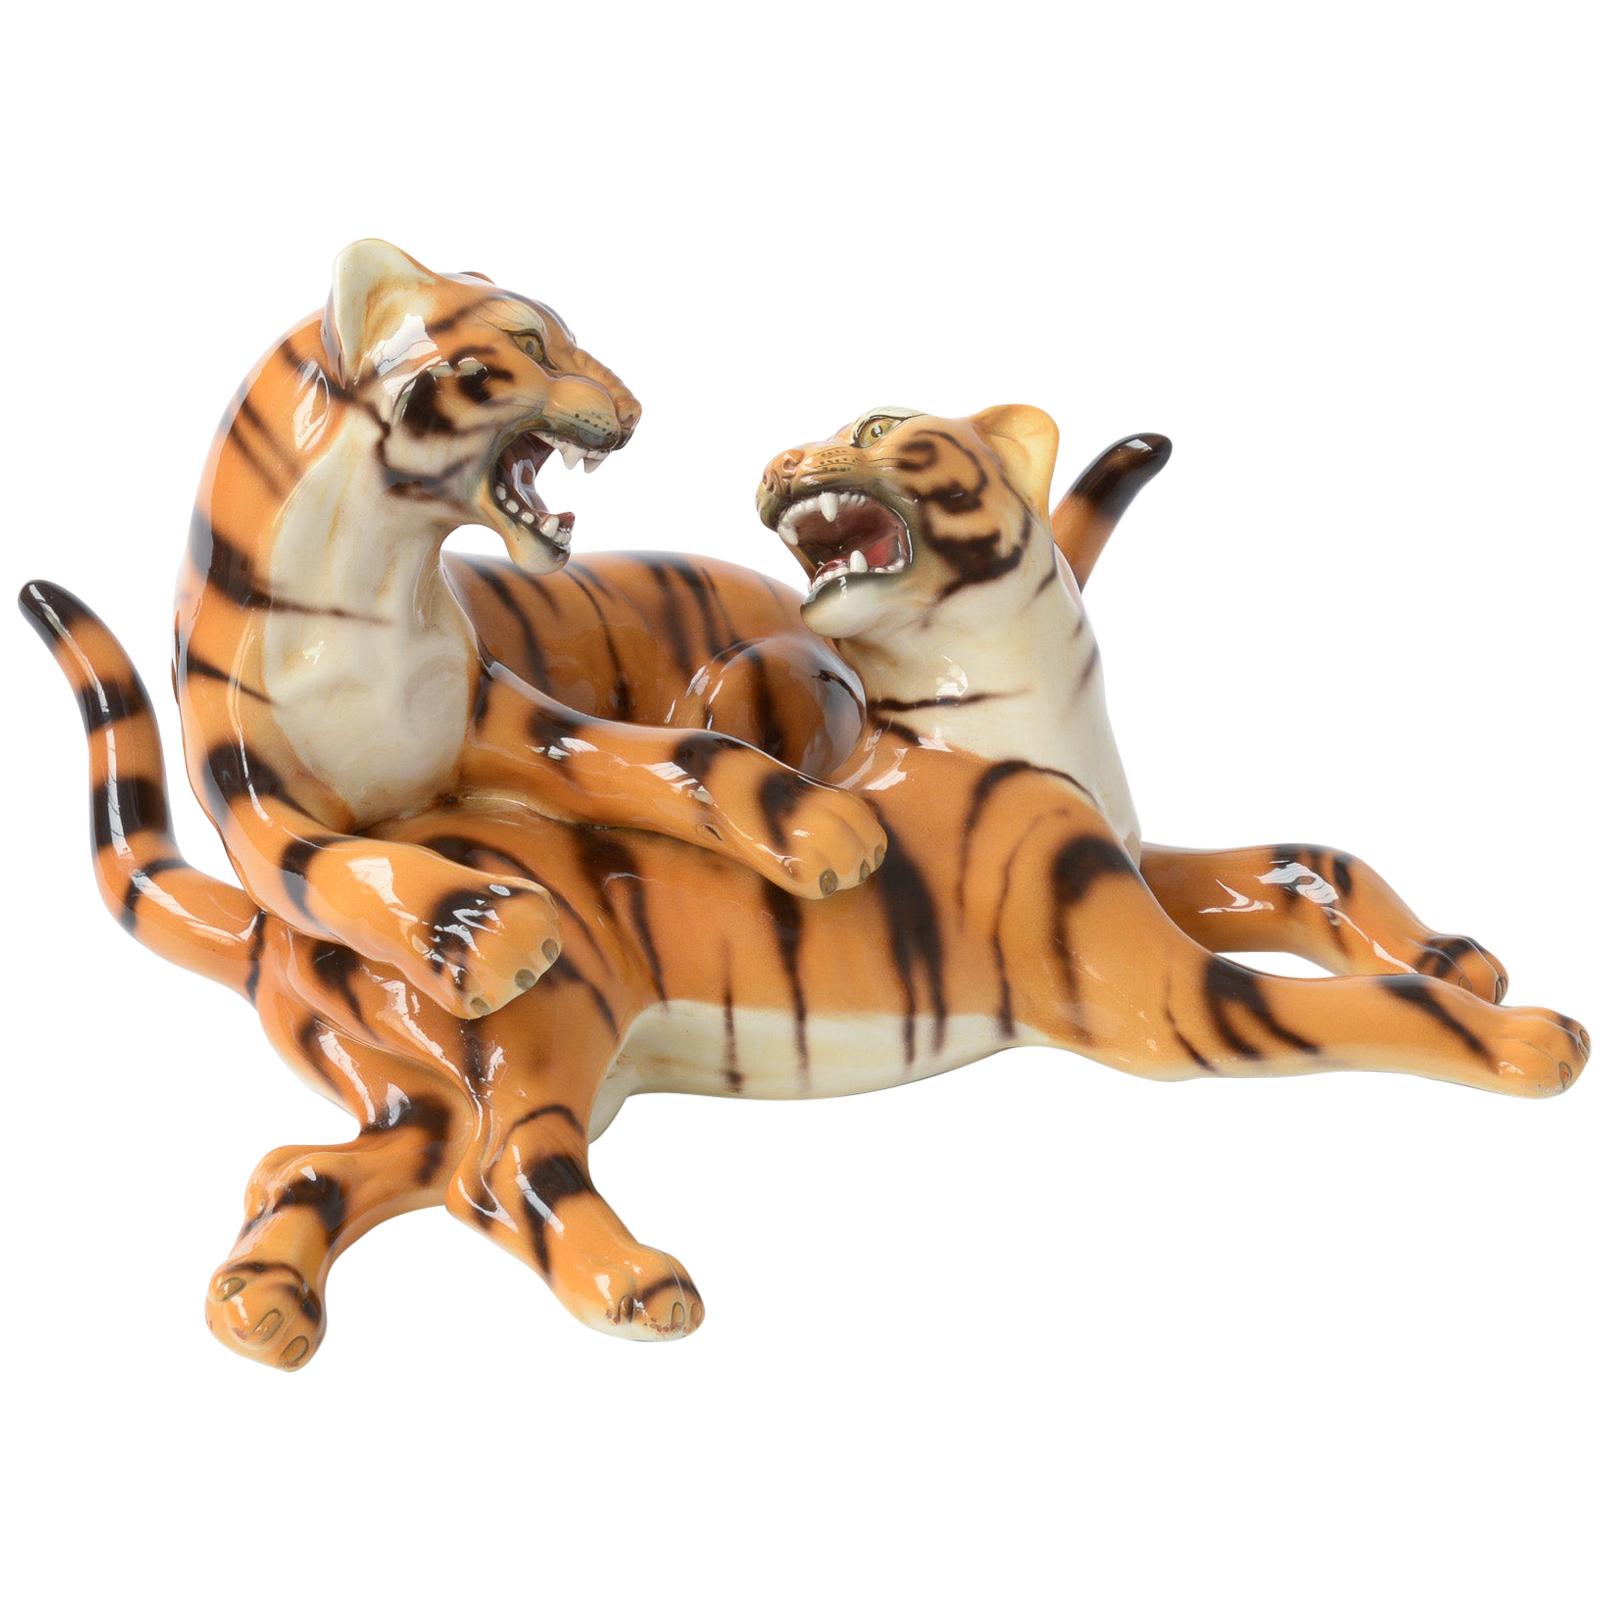 Porcelain Sculpture of Playing Tigers by Ronzan, Italy